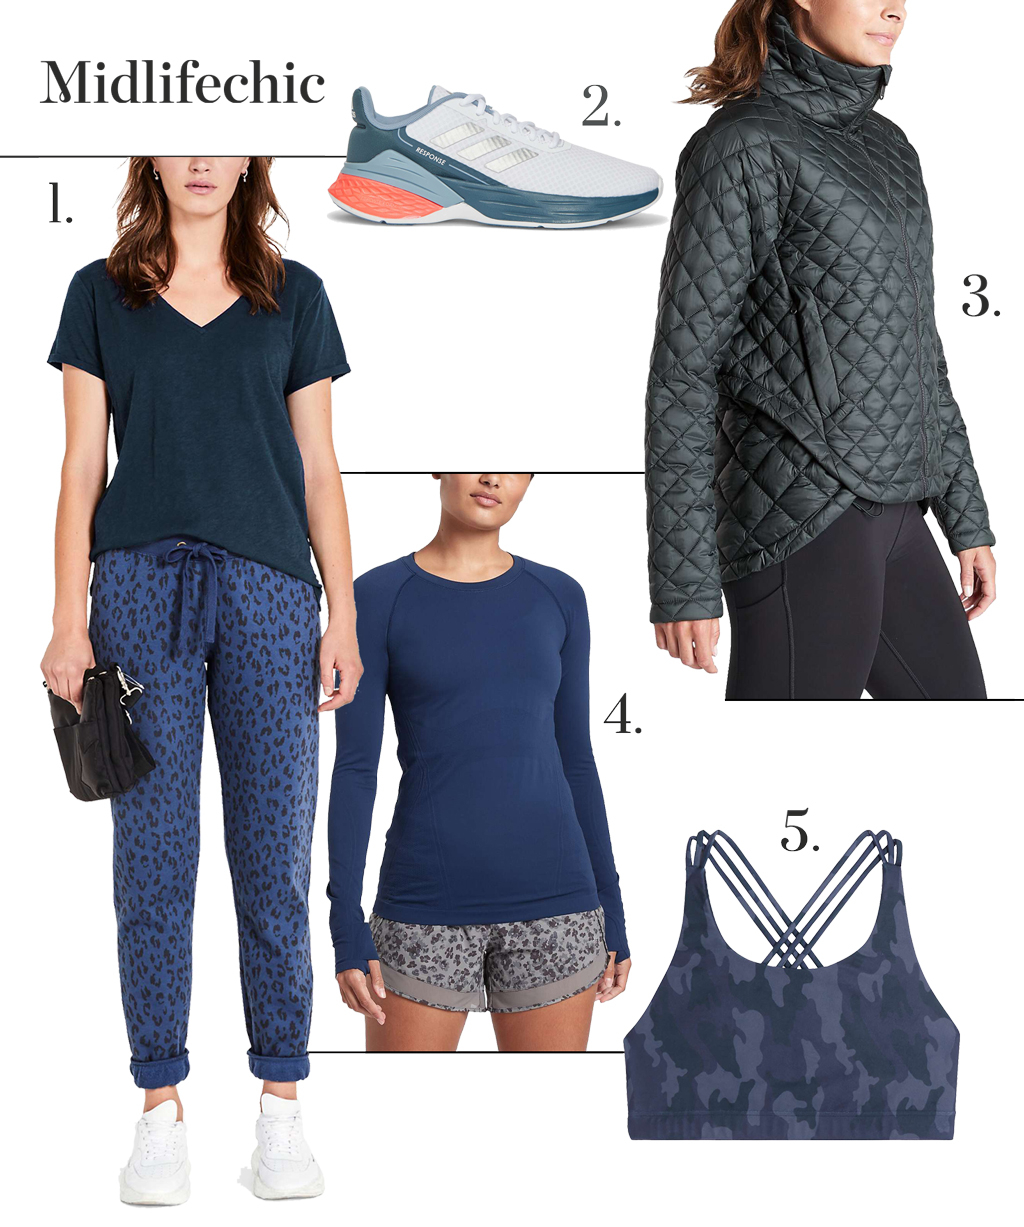 Athleisure - how to style it when you're over 40